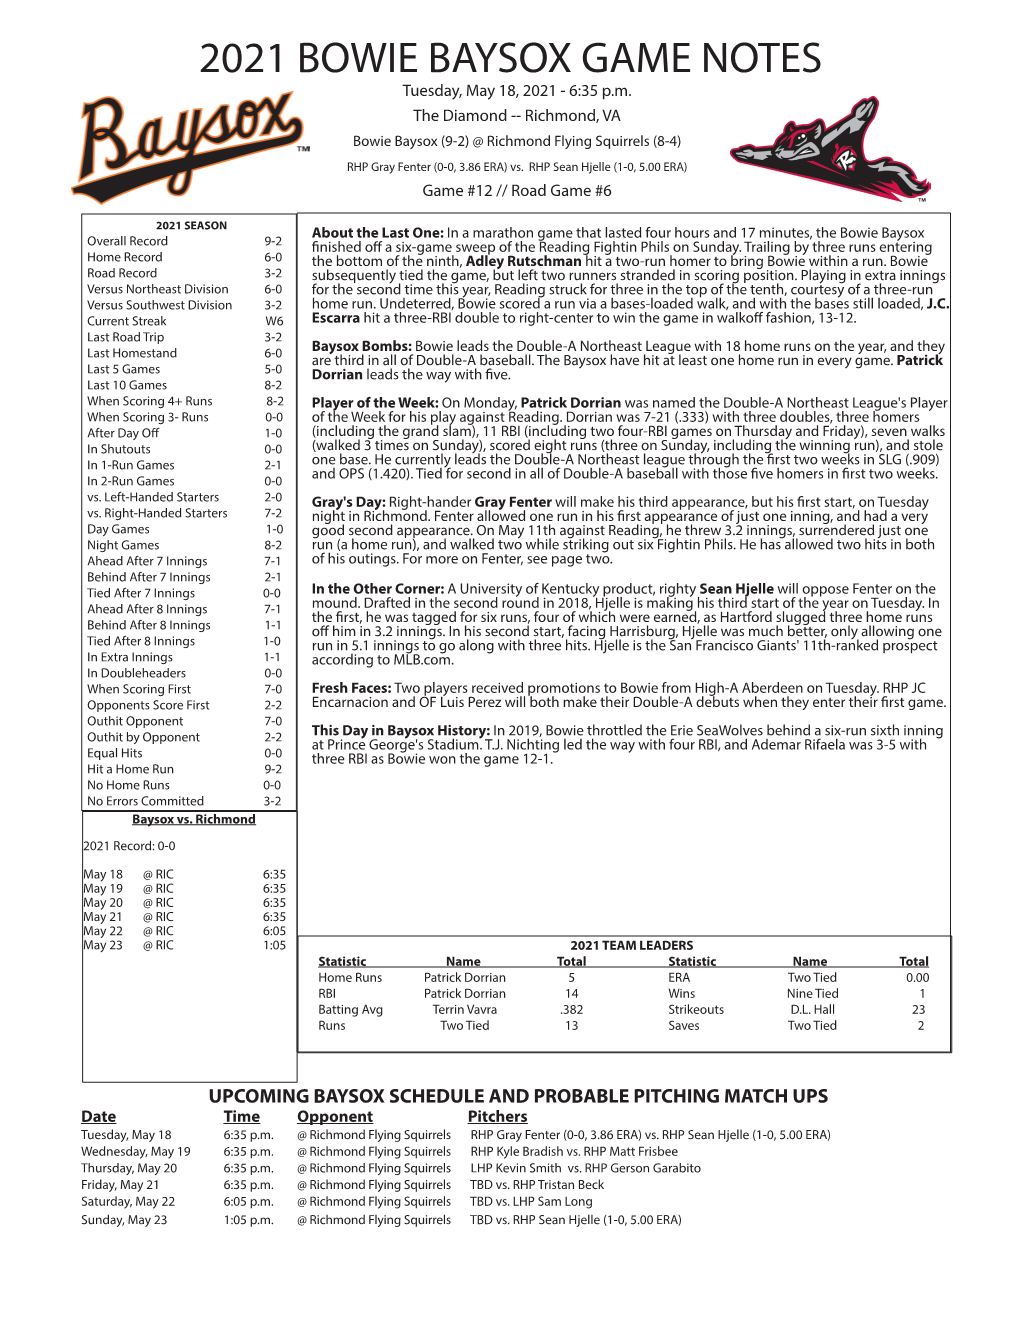 2021 BOWIE BAYSOX GAME NOTES Tuesday, May 18, 2021 - 6:35 P.M